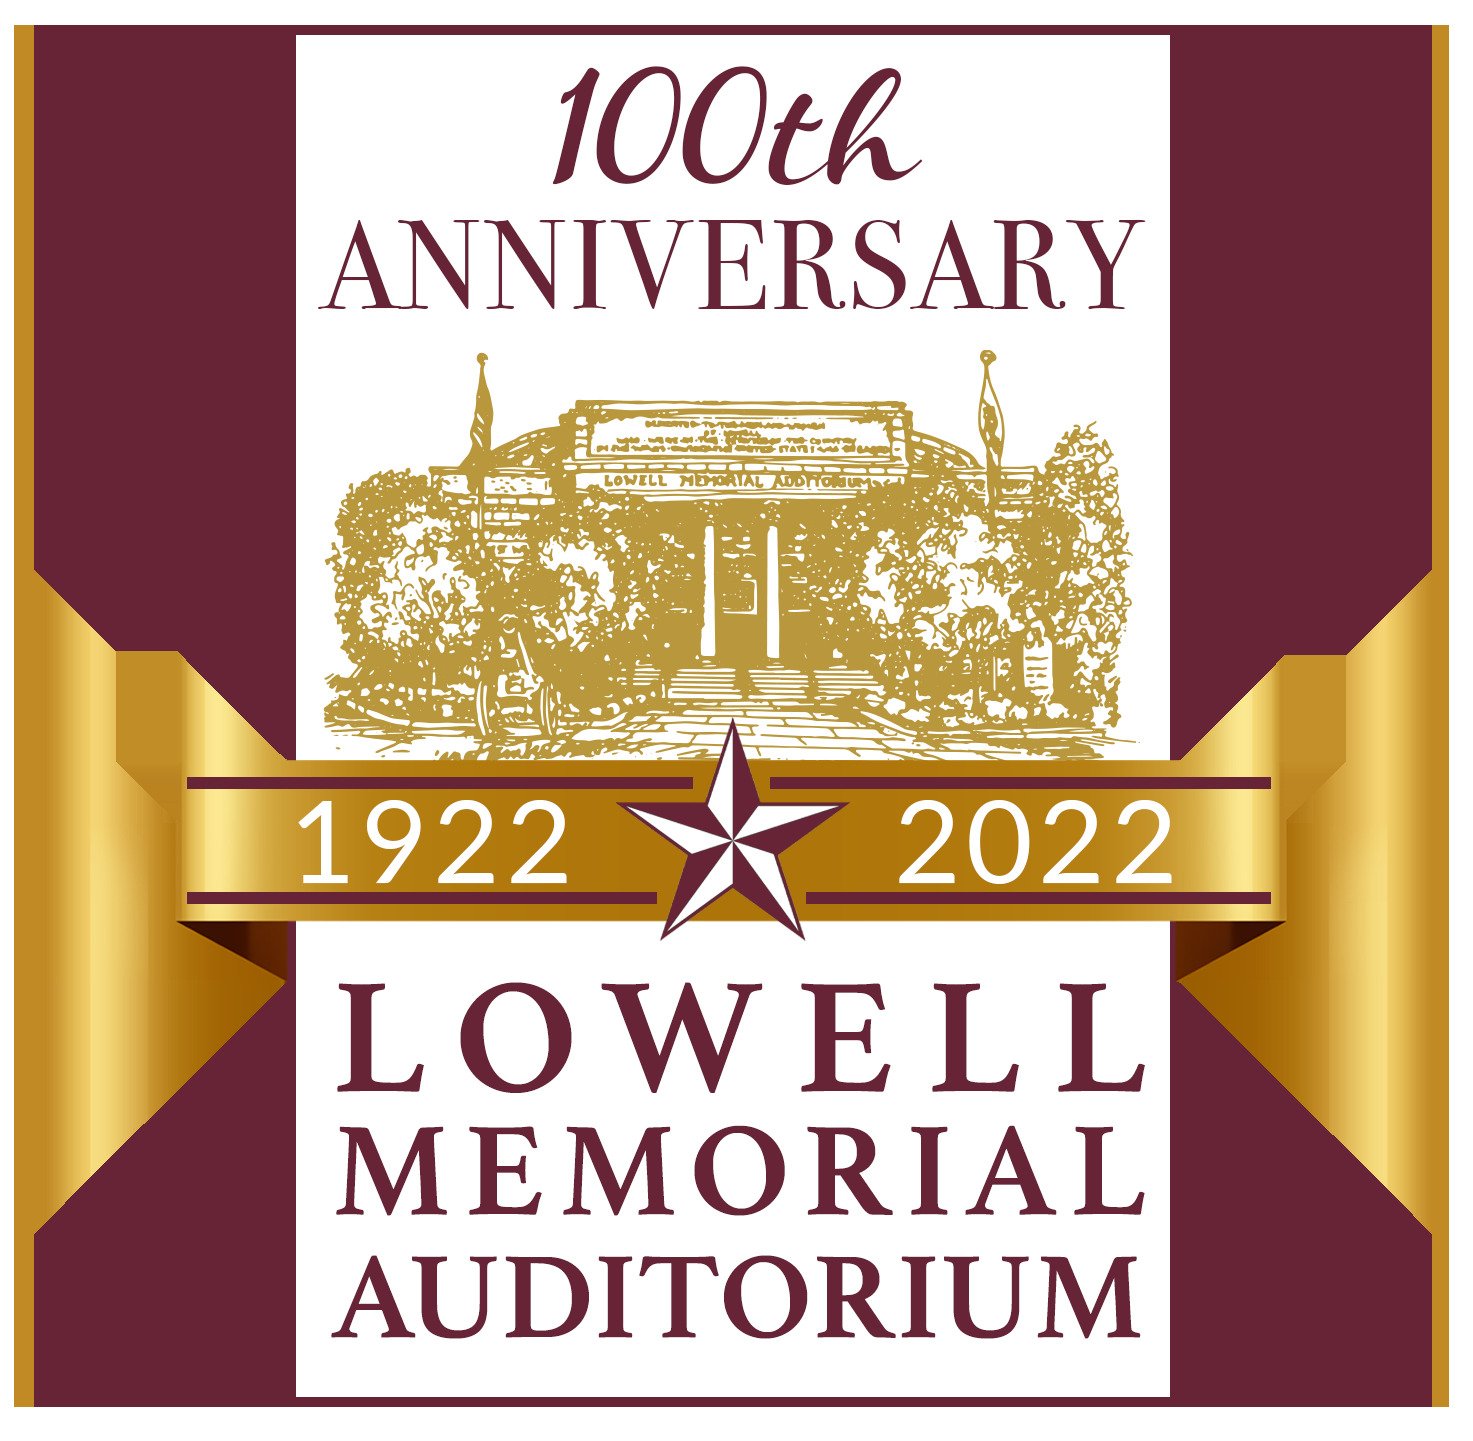 Celebration and Rededication - Lowell Memorial Auditorium (Lowell, MA.)